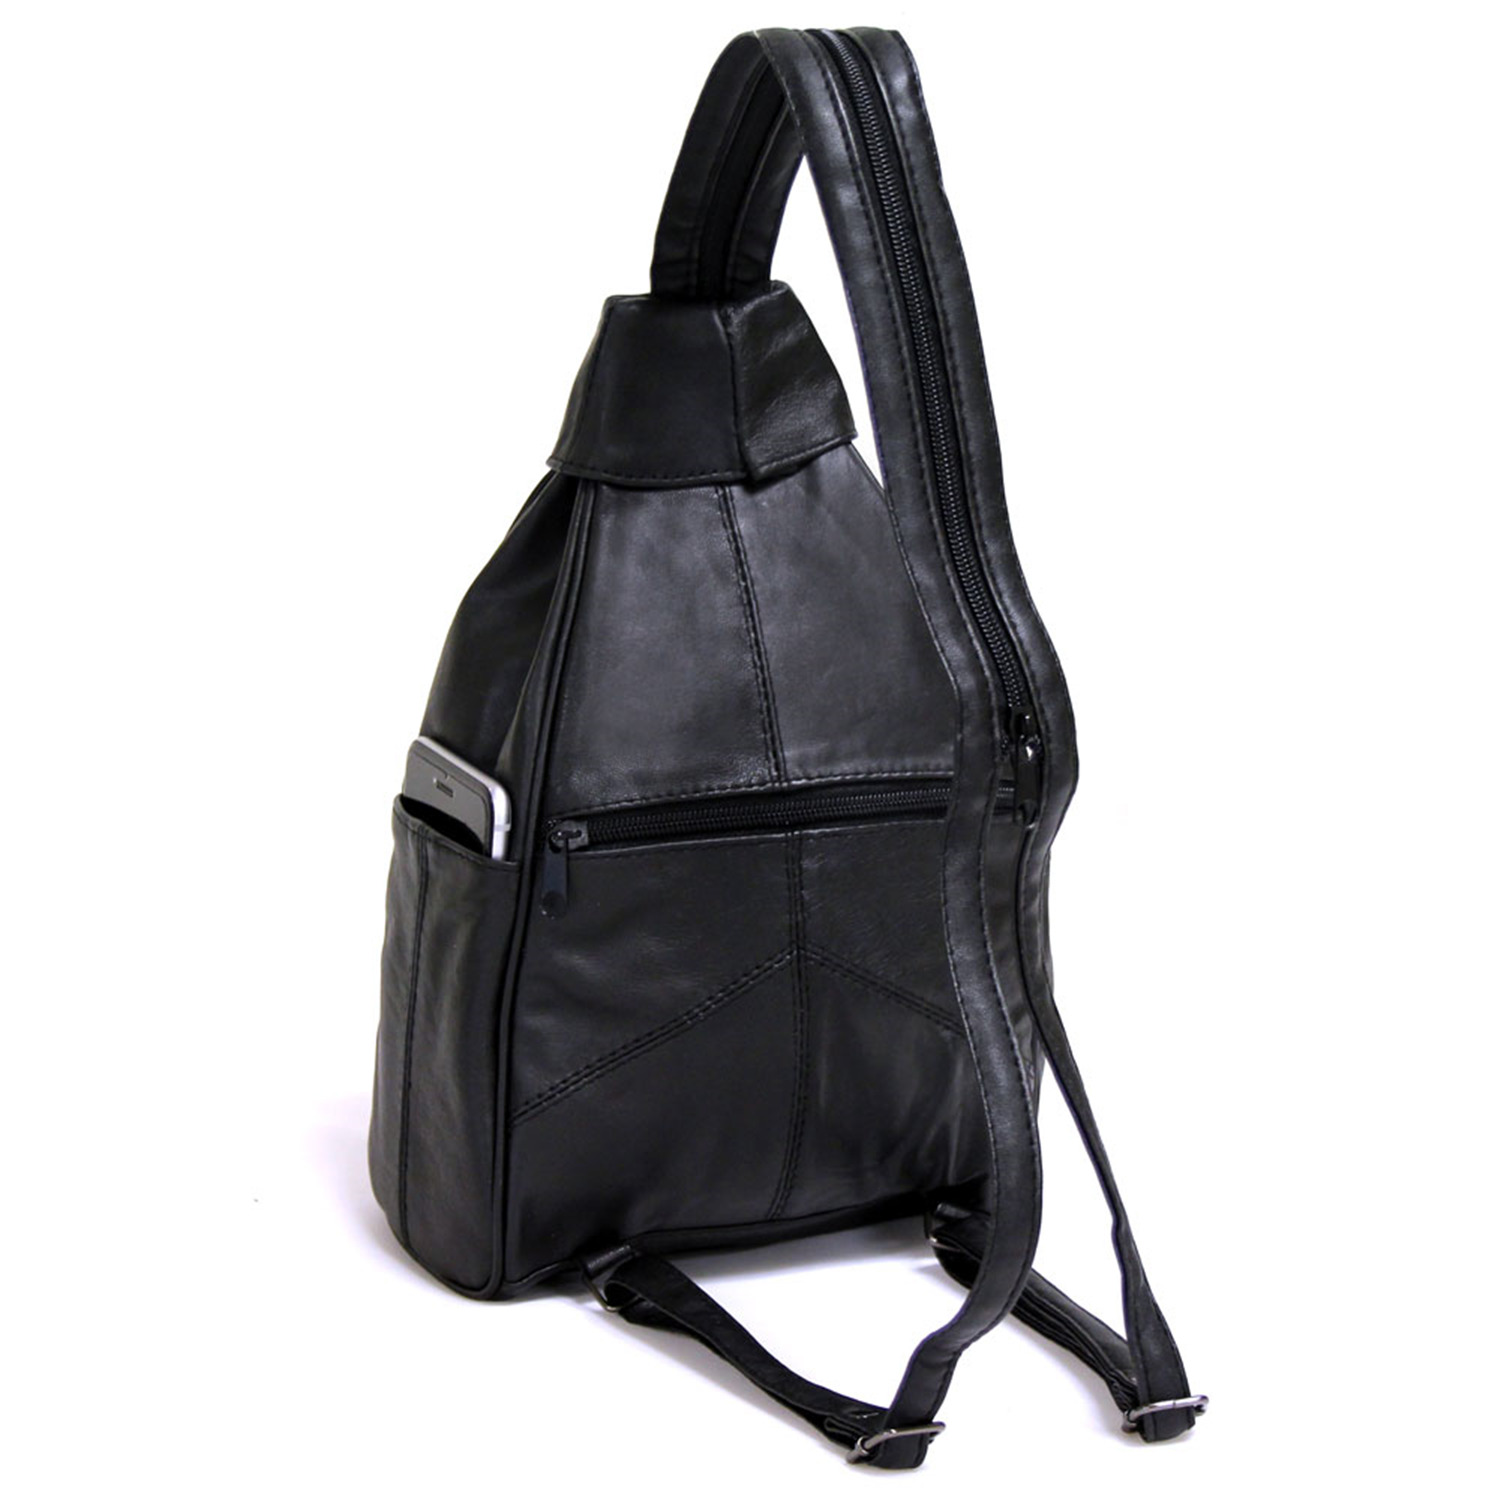 Leather Mini Backpack - image 2 of 2